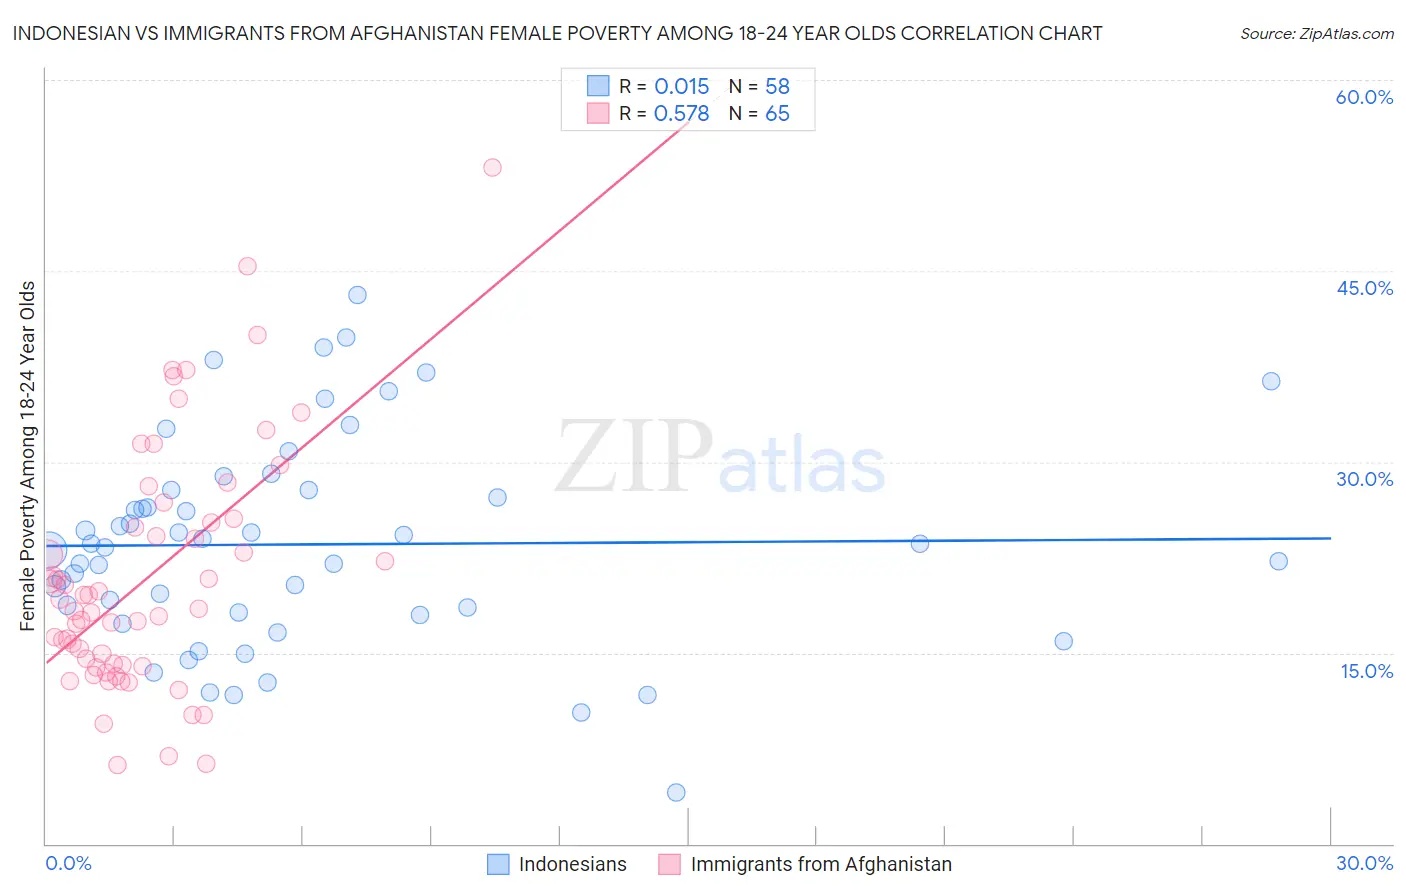 Indonesian vs Immigrants from Afghanistan Female Poverty Among 18-24 Year Olds